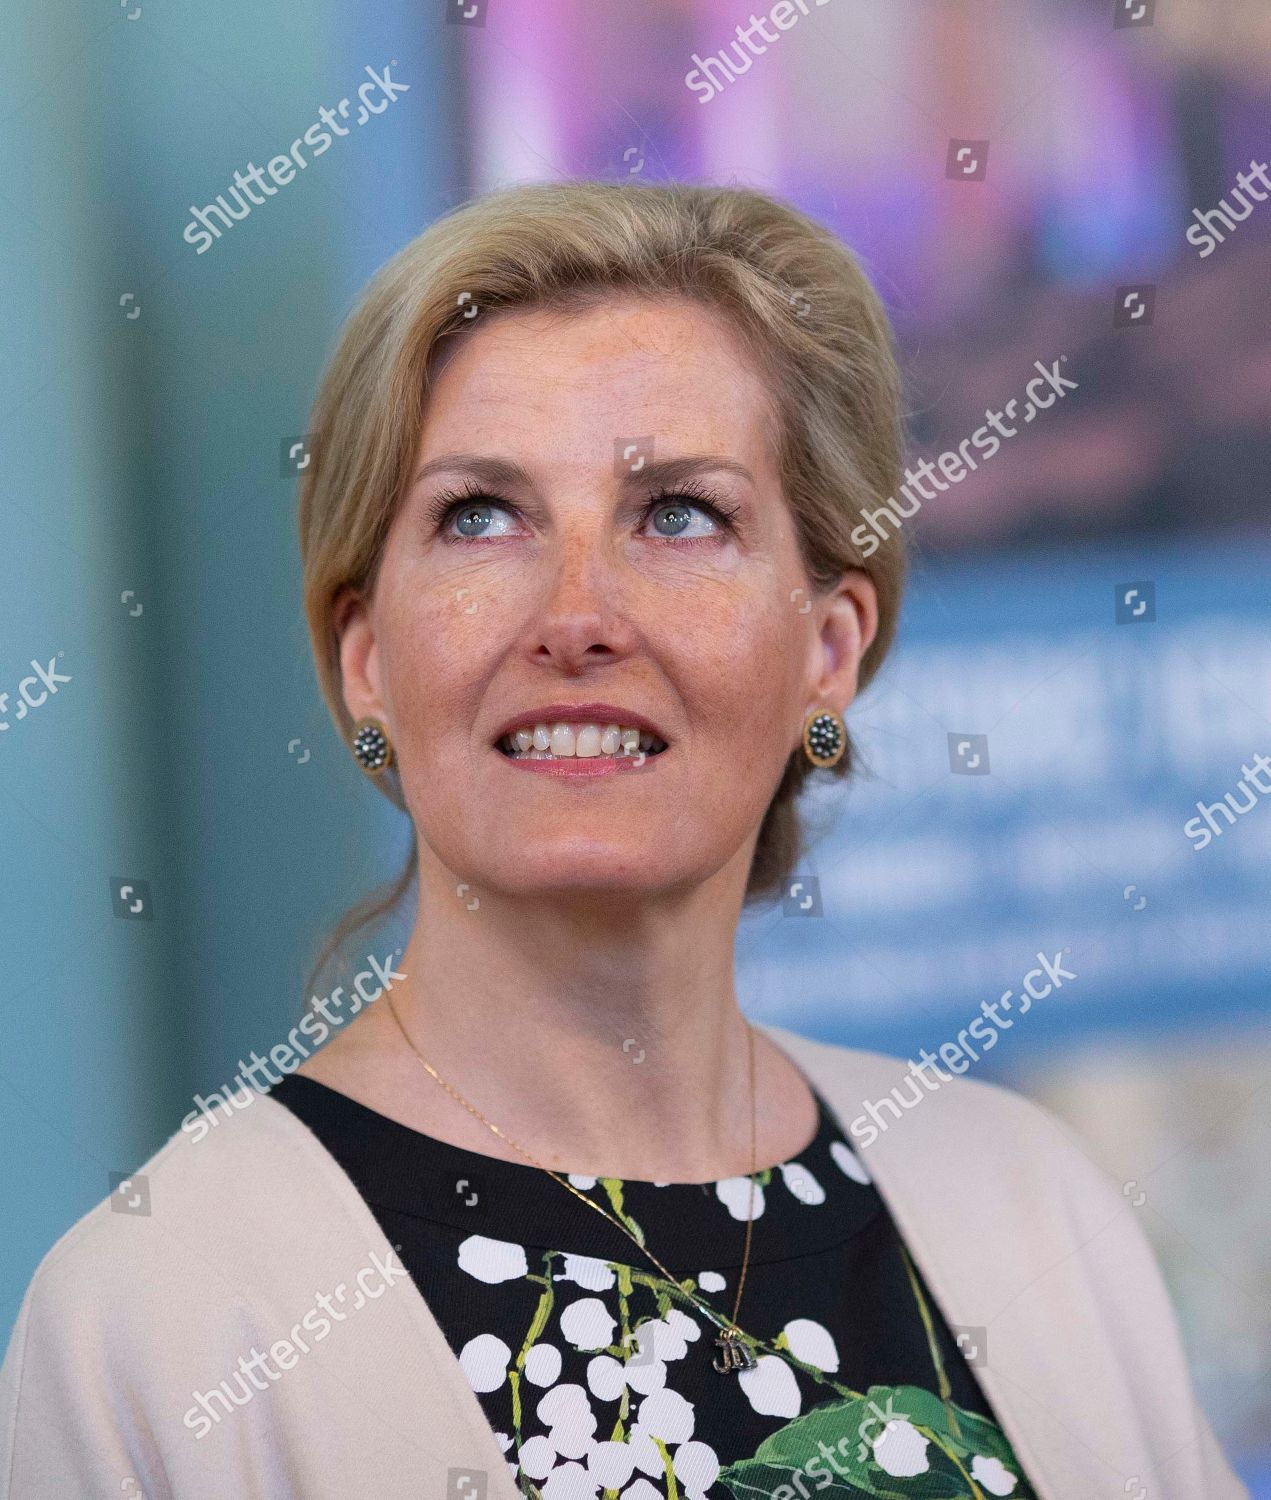 countess-of-wessex-visit-to-somerset-uk-shutterstock-editorial-10120499h.jpg